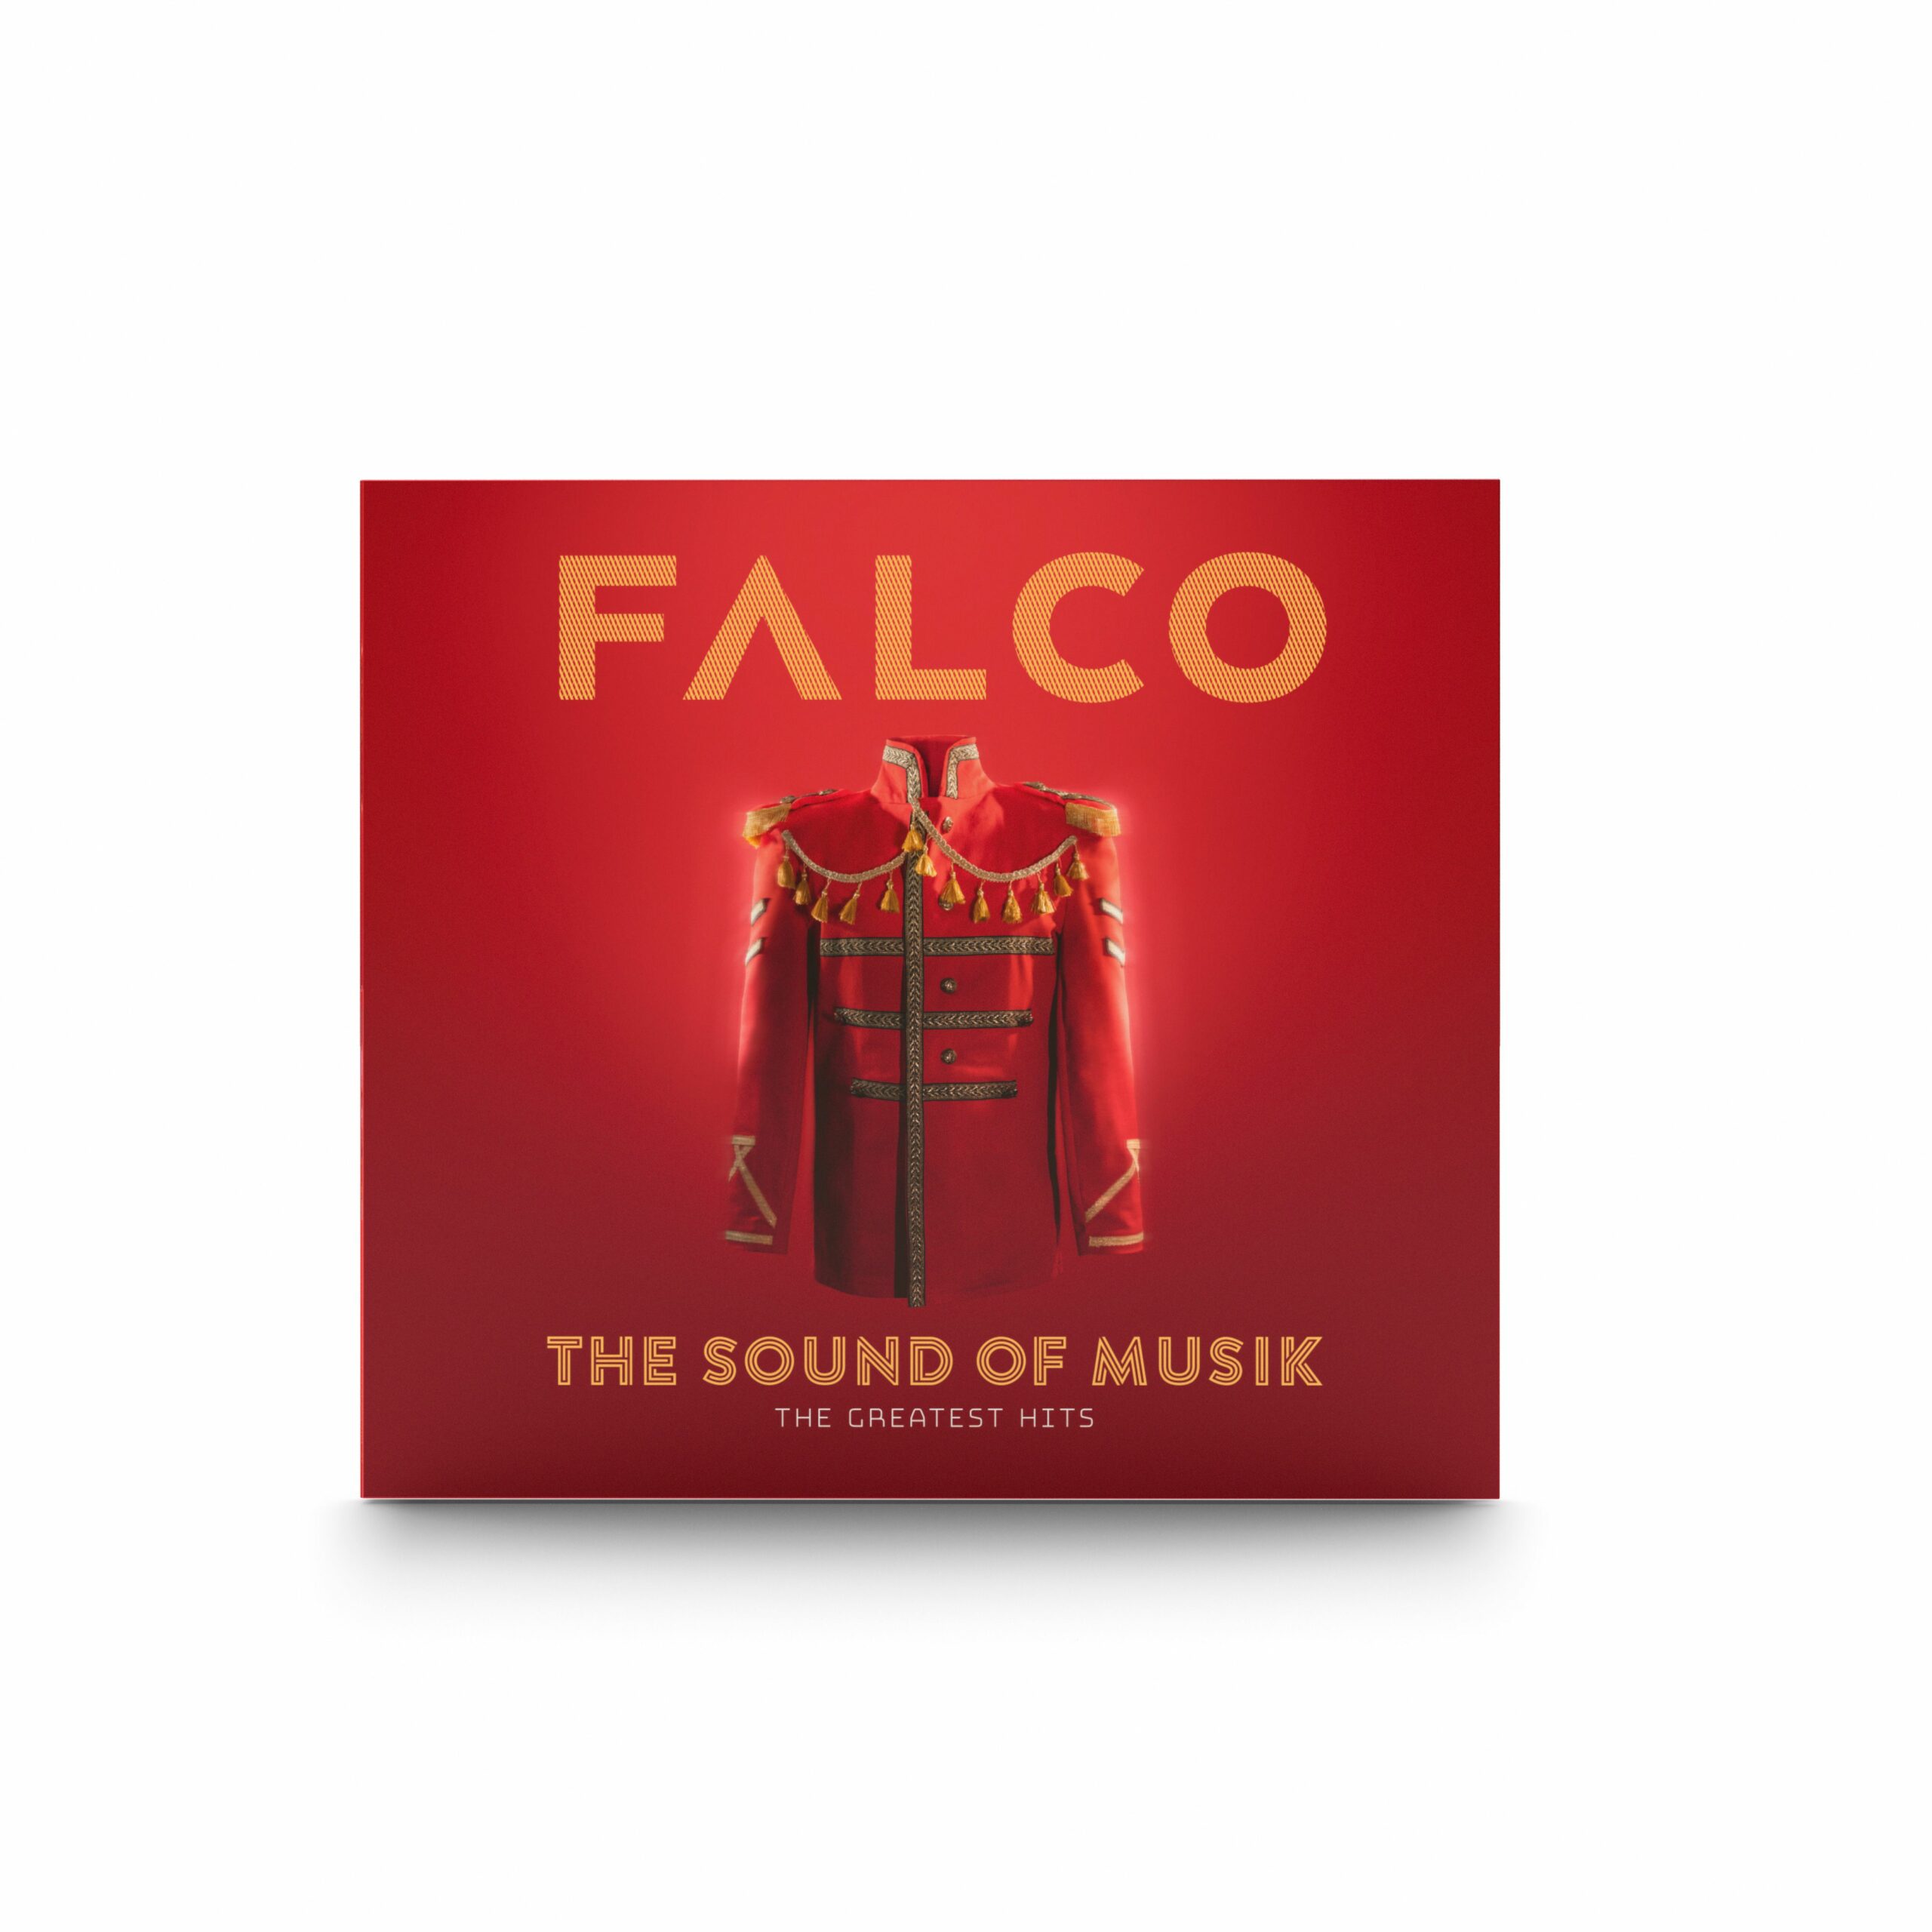 Falco (A) – The Sound Of Musik: The Greatest Hits